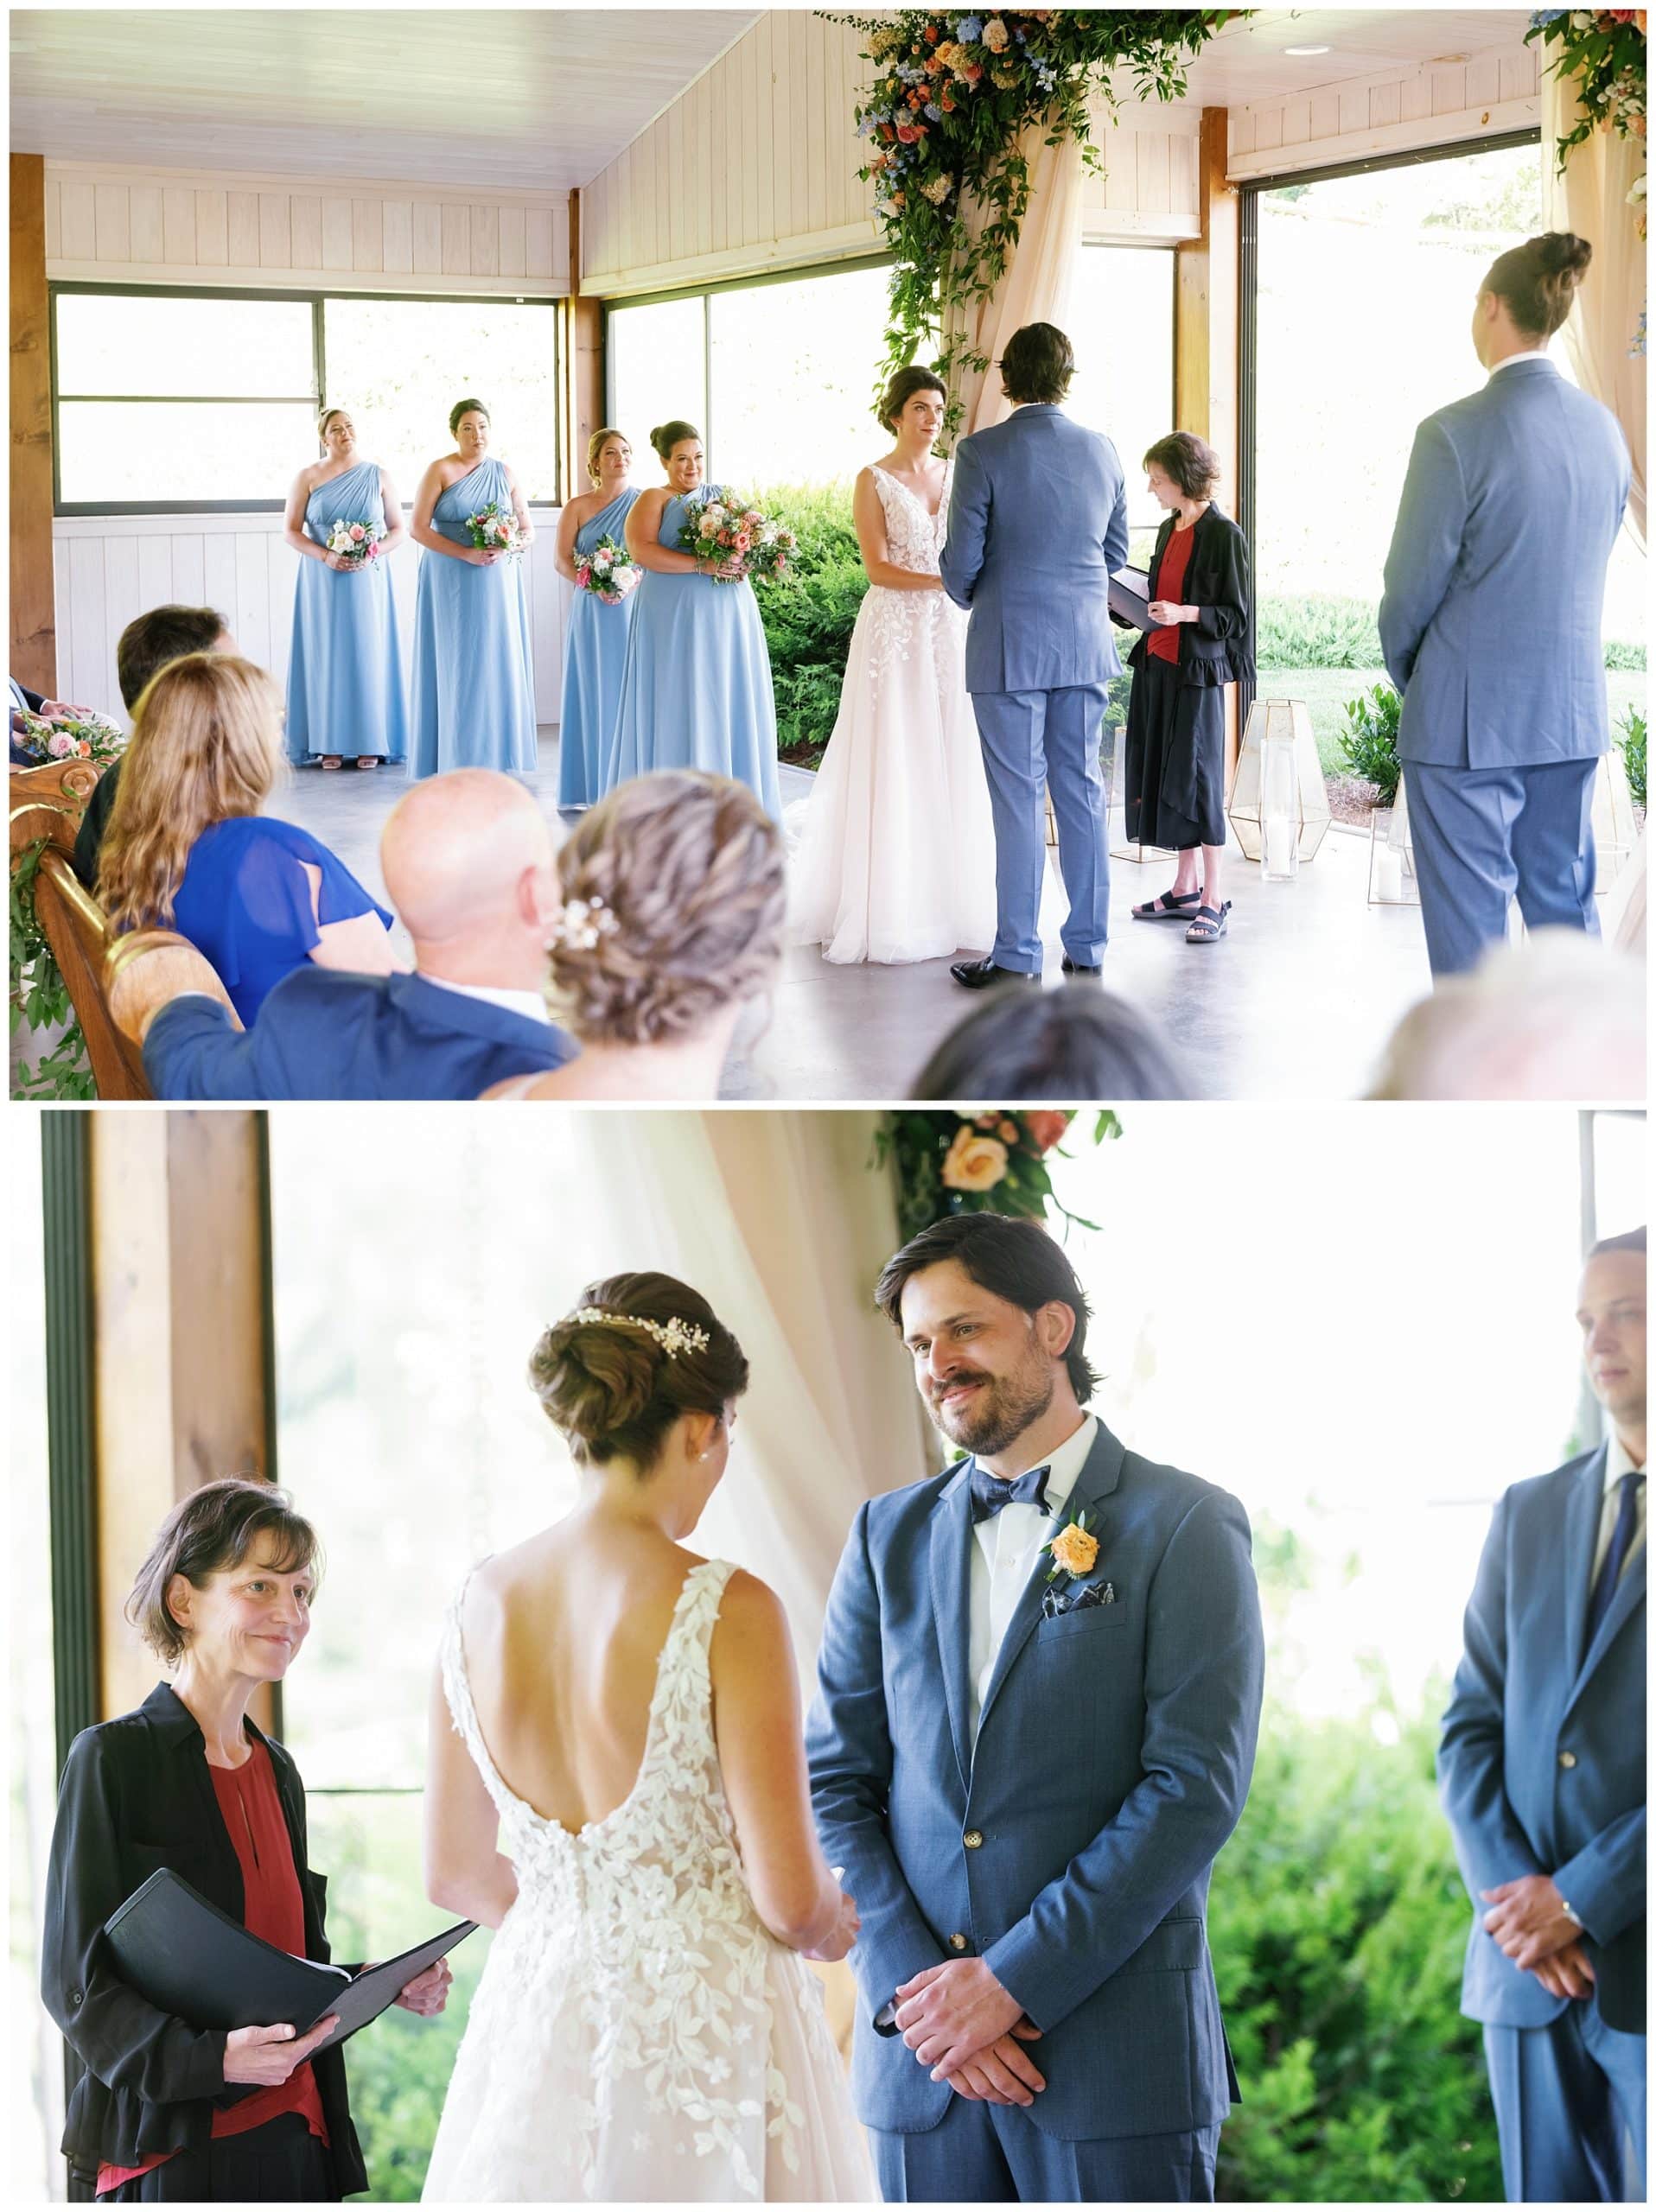 A bride and groom exchange vows during a wedding ceremony.